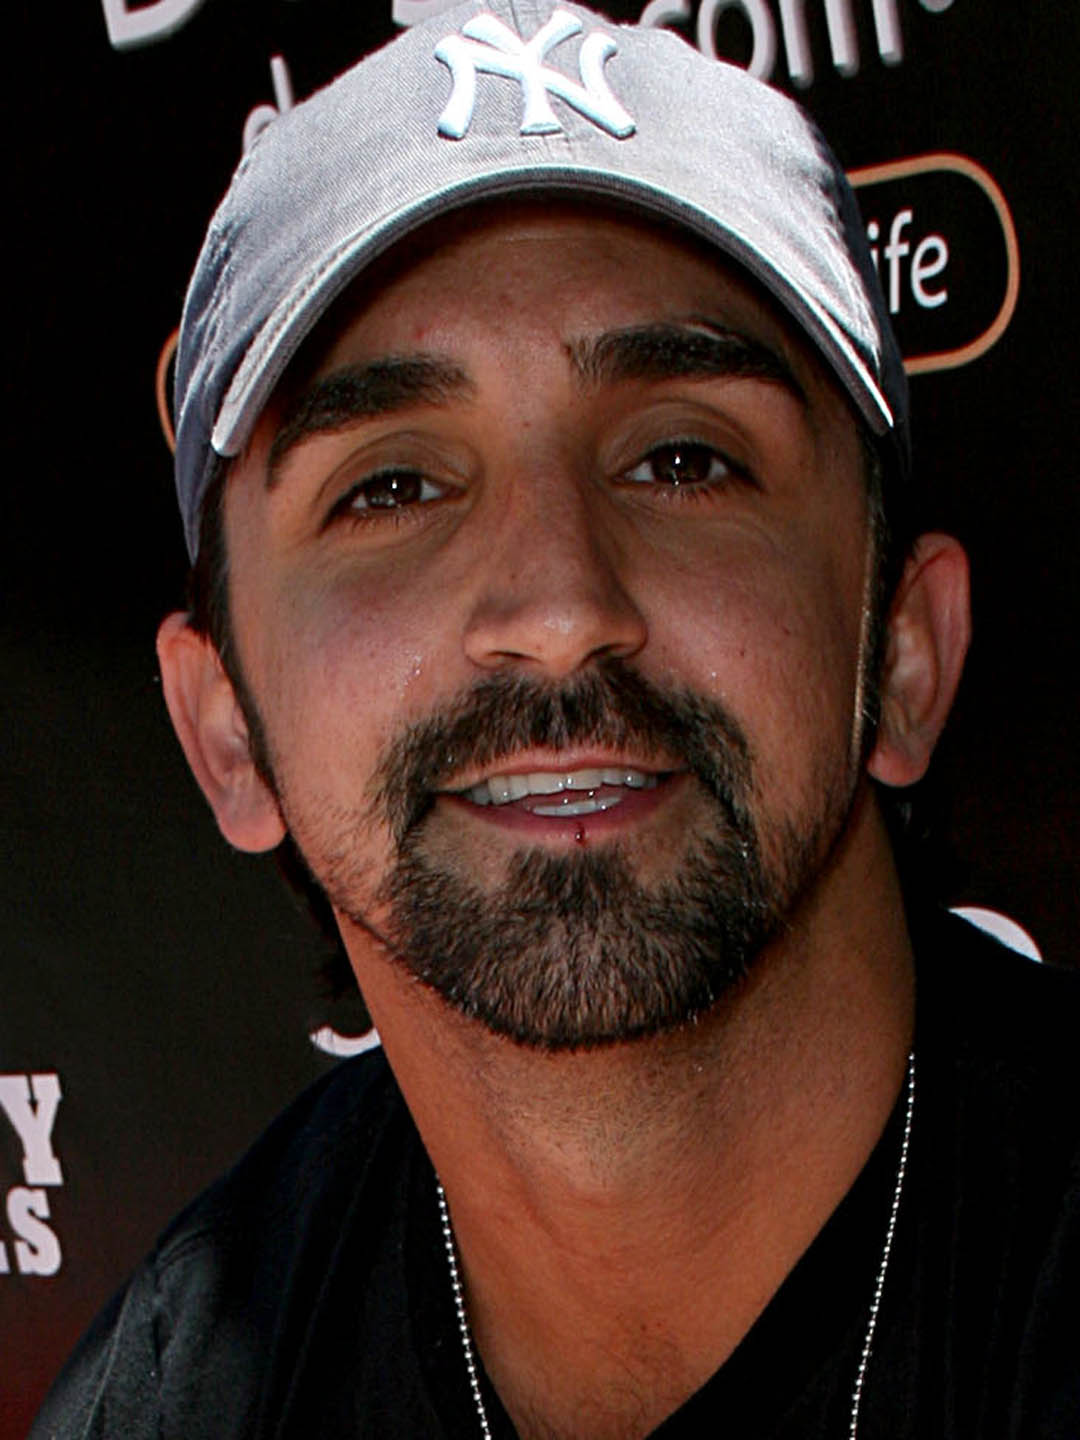 How tall is James Madio?